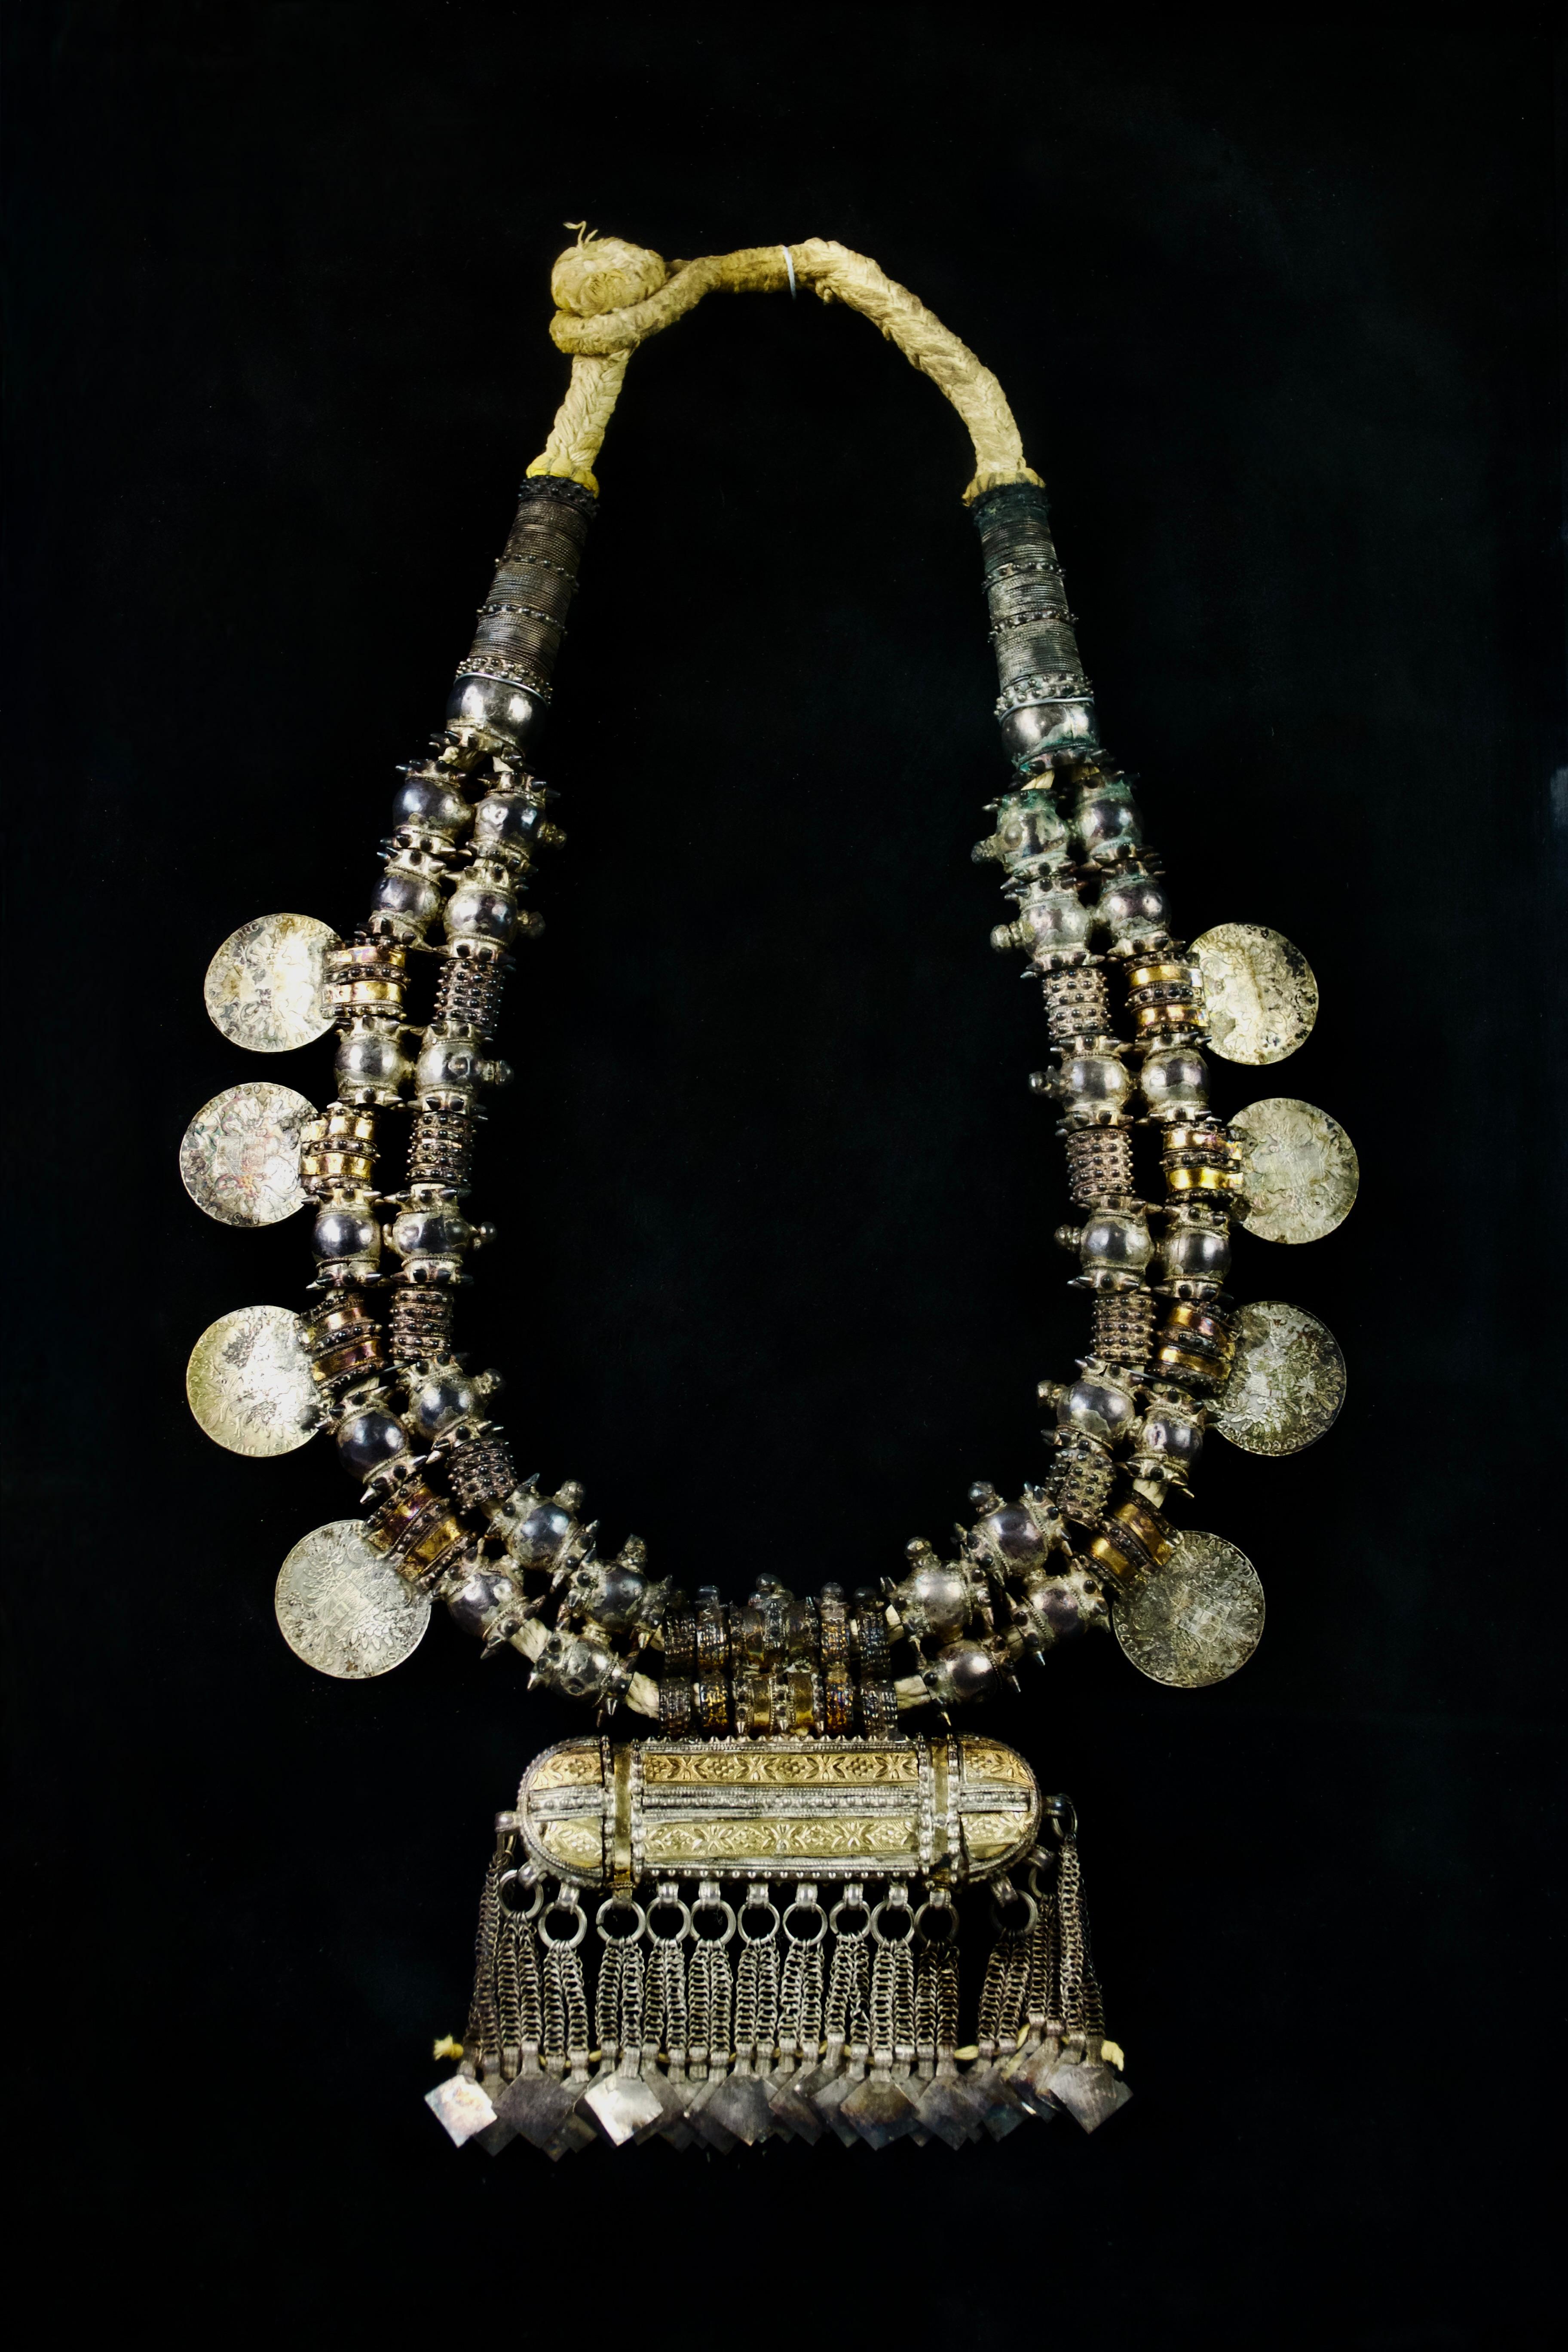 Stunning and rare Omani tribal necklace in gold and silver featuring eight Burgau thalers dated 1780. 19th century.

Very good condition. Preserved and professionally framed.

Dimensions of the necklace: 52 x 30 x 3
Dimensions of the frame: 70